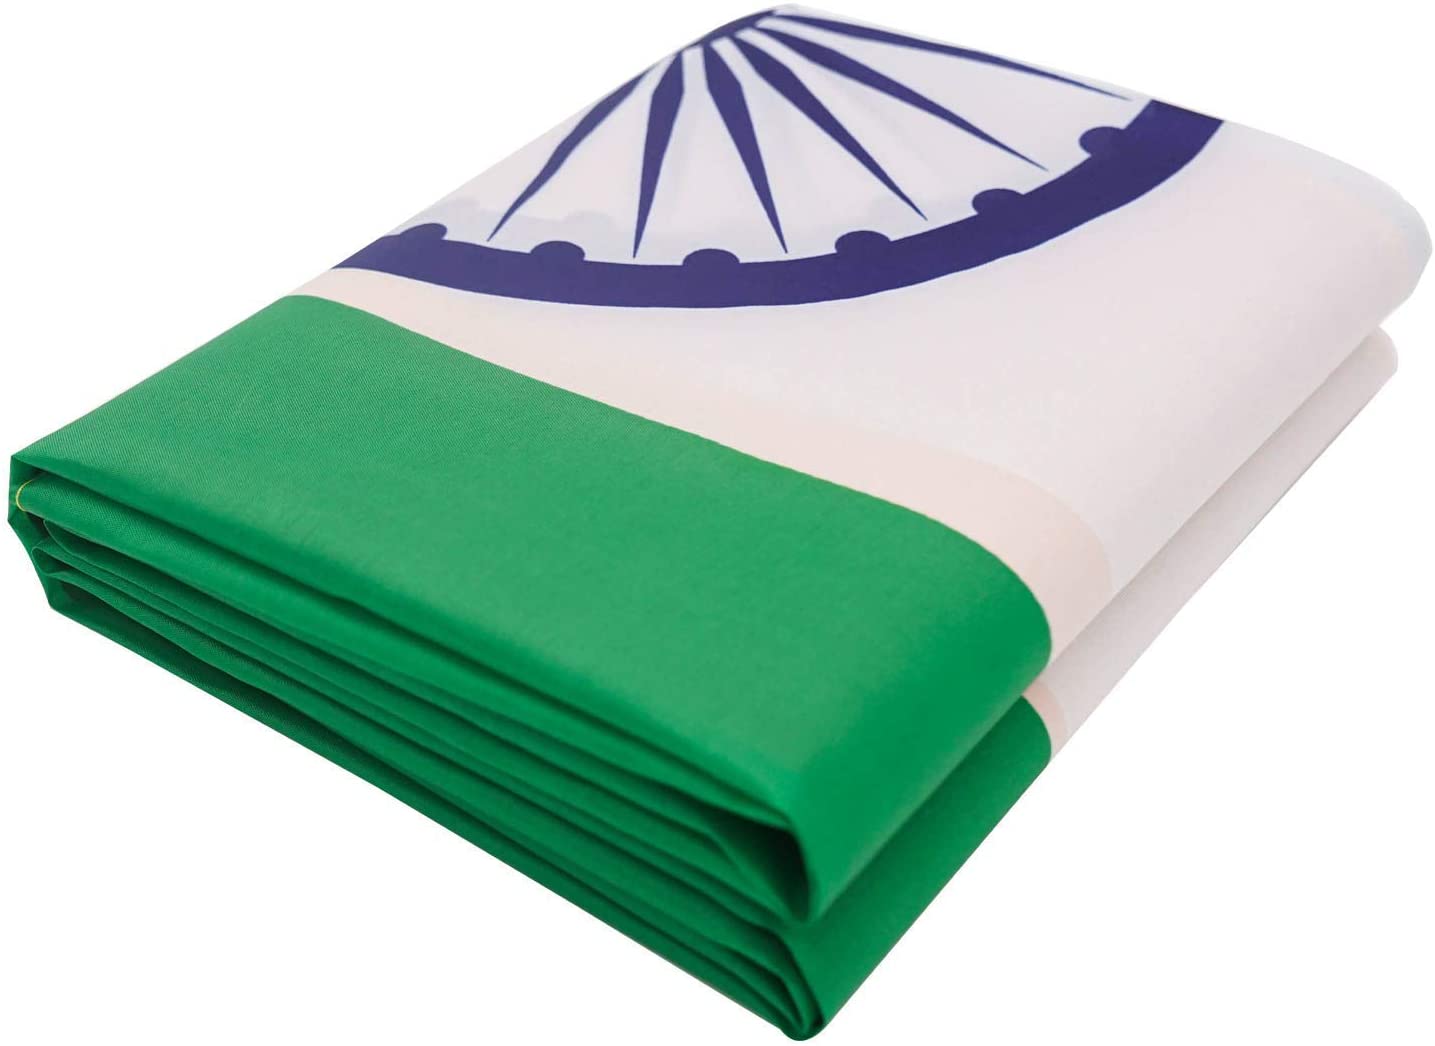 DANF India Flag 3'x5' Indian National Flags Polyester with Brass Grommets